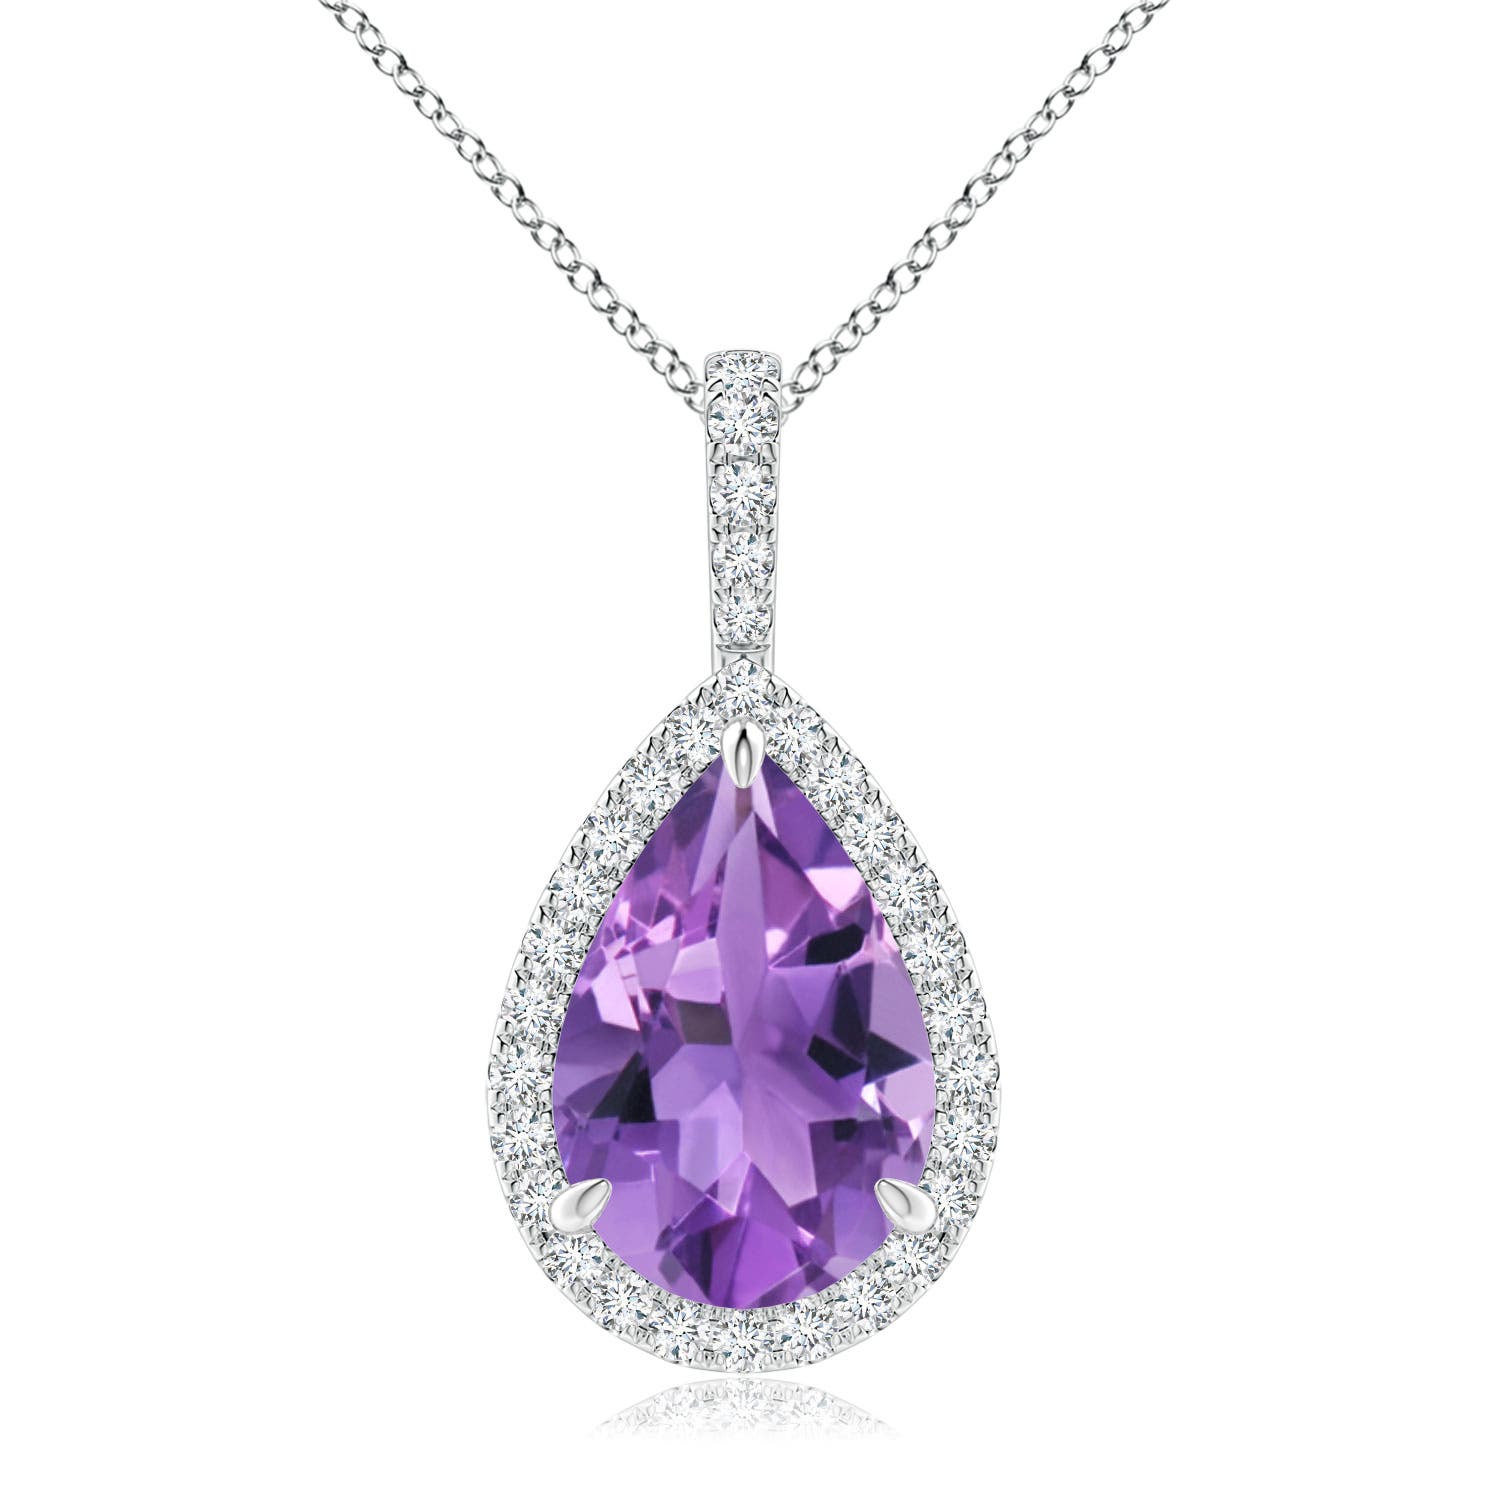 AA - Amethyst / 2.85 CT / 14 KT White Gold